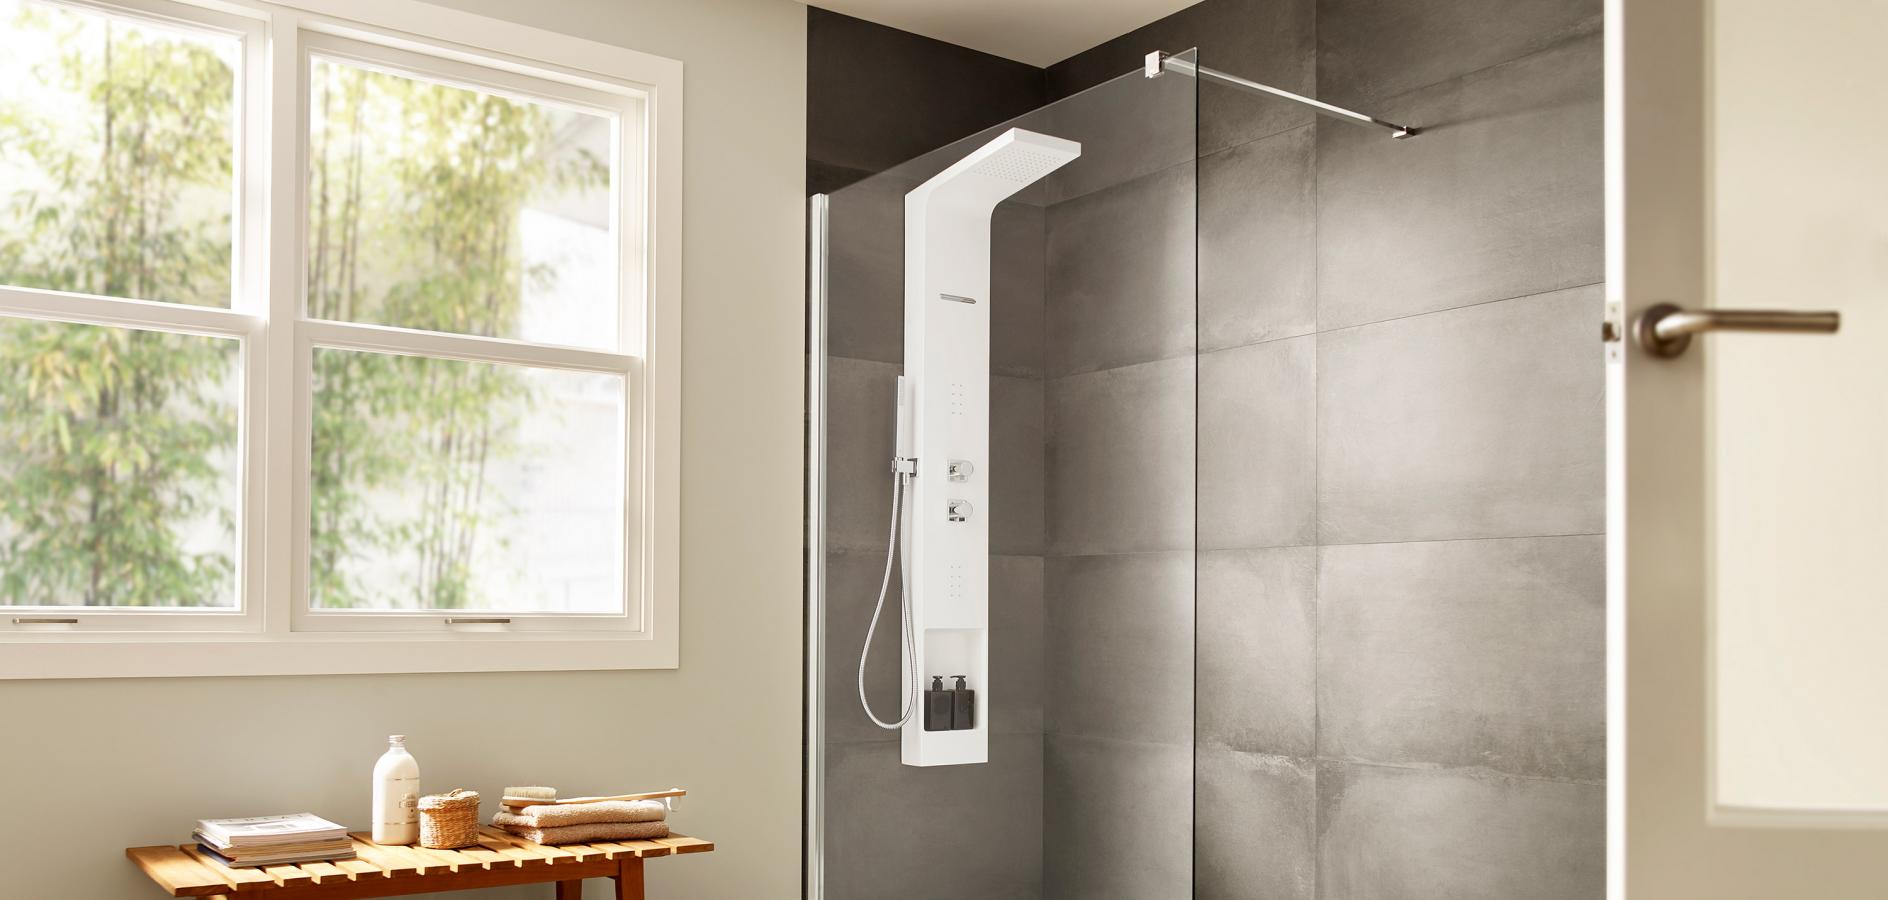 Connectable Shower Column - Collection Victoria-T by Roca